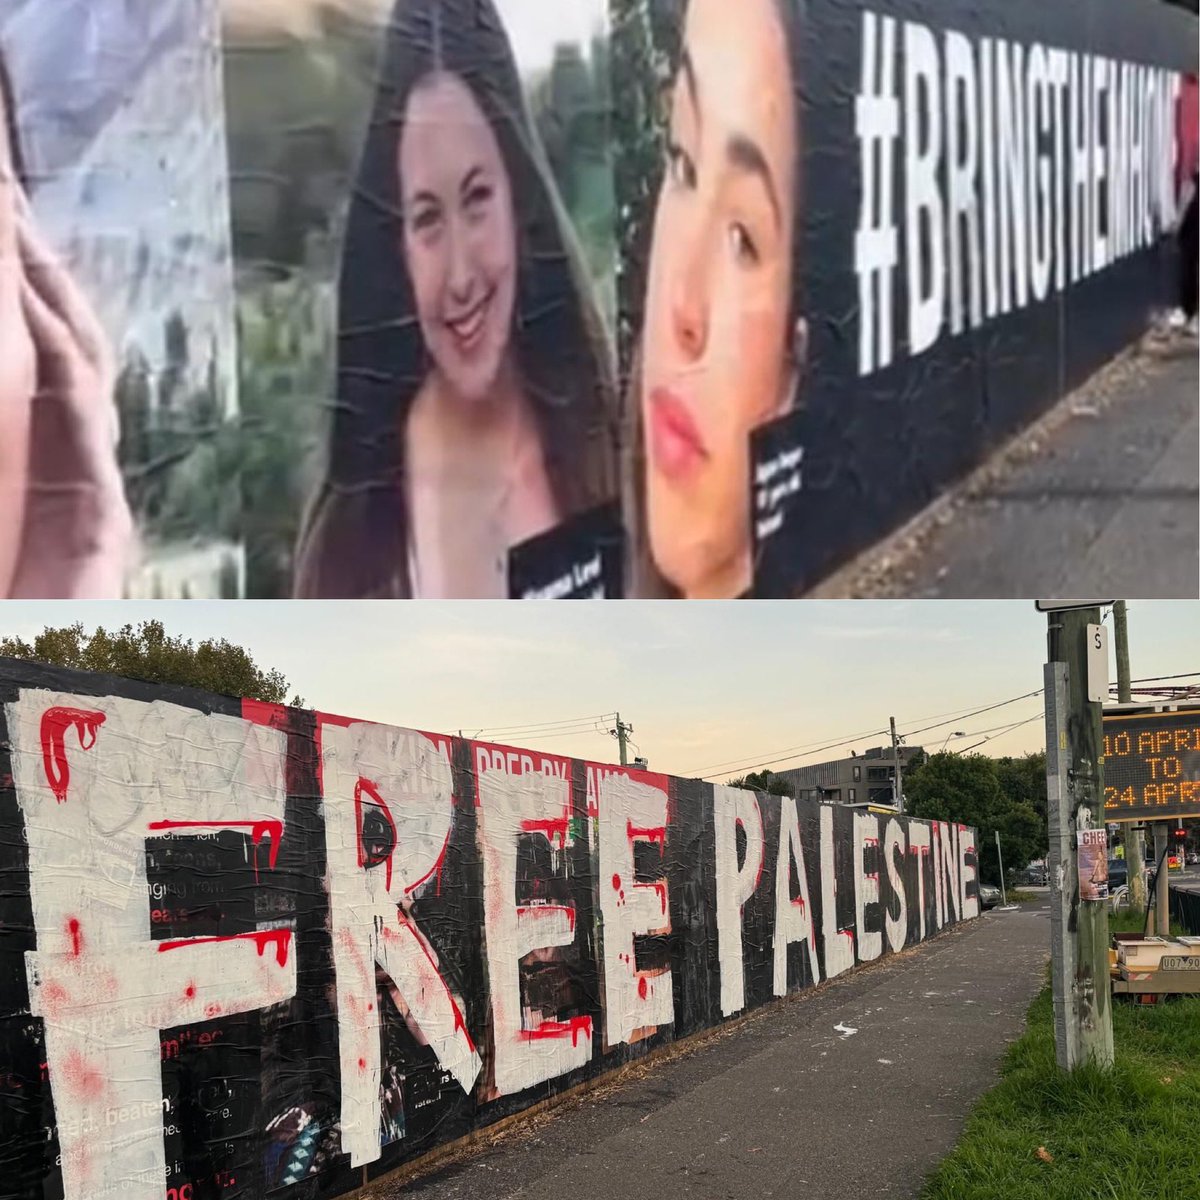 Honestly - what the hell is offensive about a banner with pictures of a baby and rape victims? And a plea to bring them home? Did defacing the banner free Palestine? You clowns are cheerleaders for a genocidal terrorist organisation and you are fucking depraved.